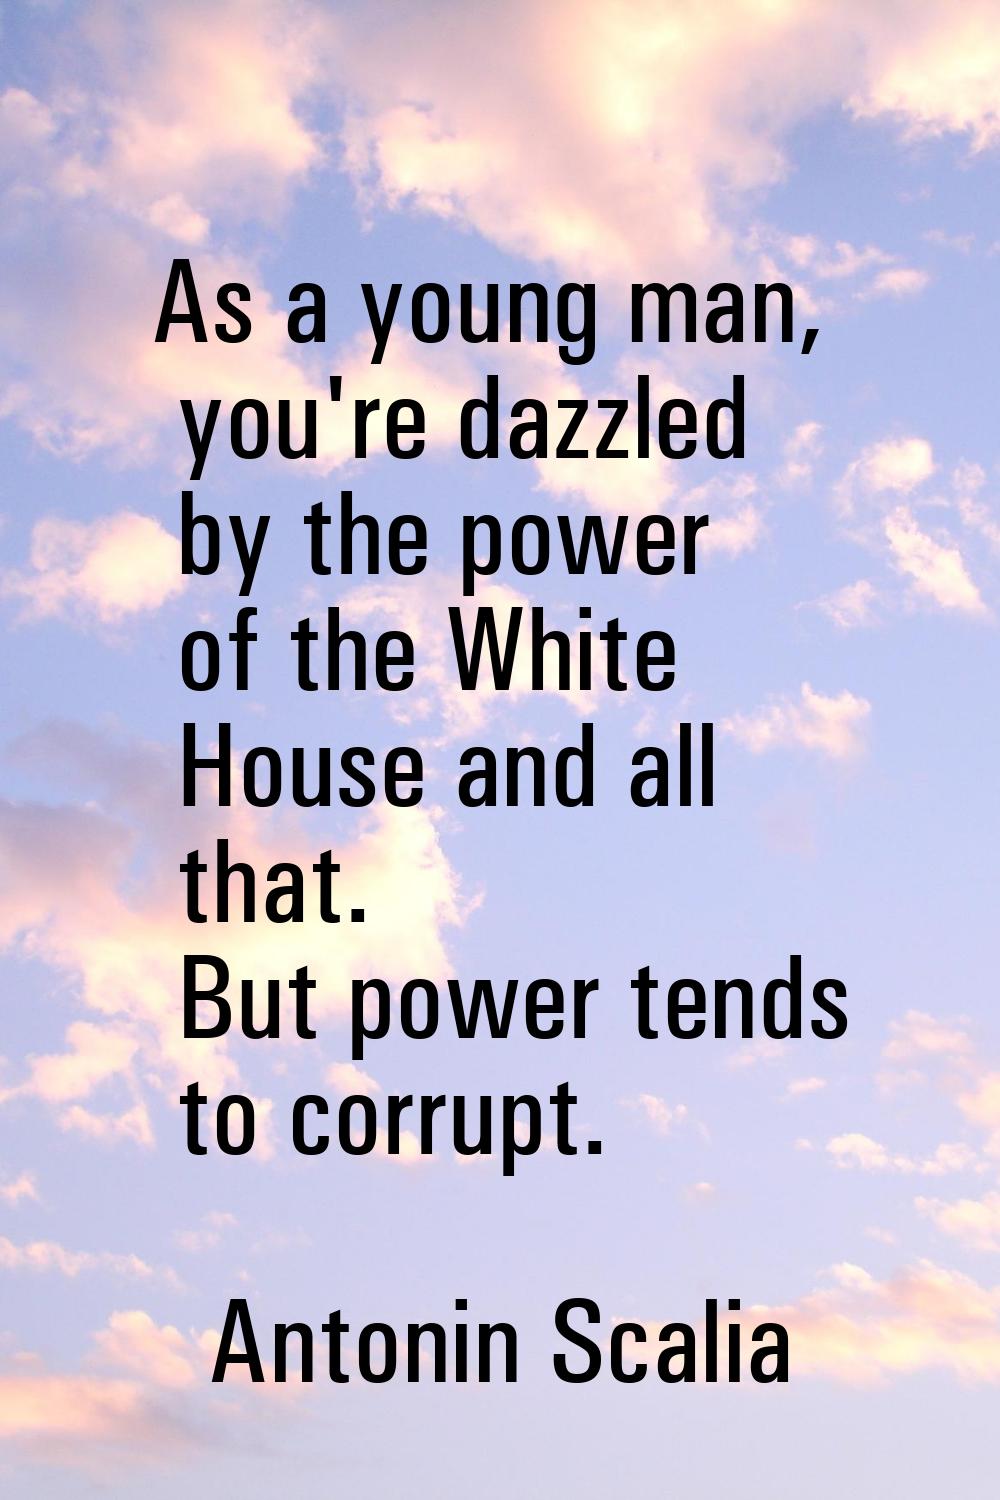 As a young man, you're dazzled by the power of the White House and all that. But power tends to cor